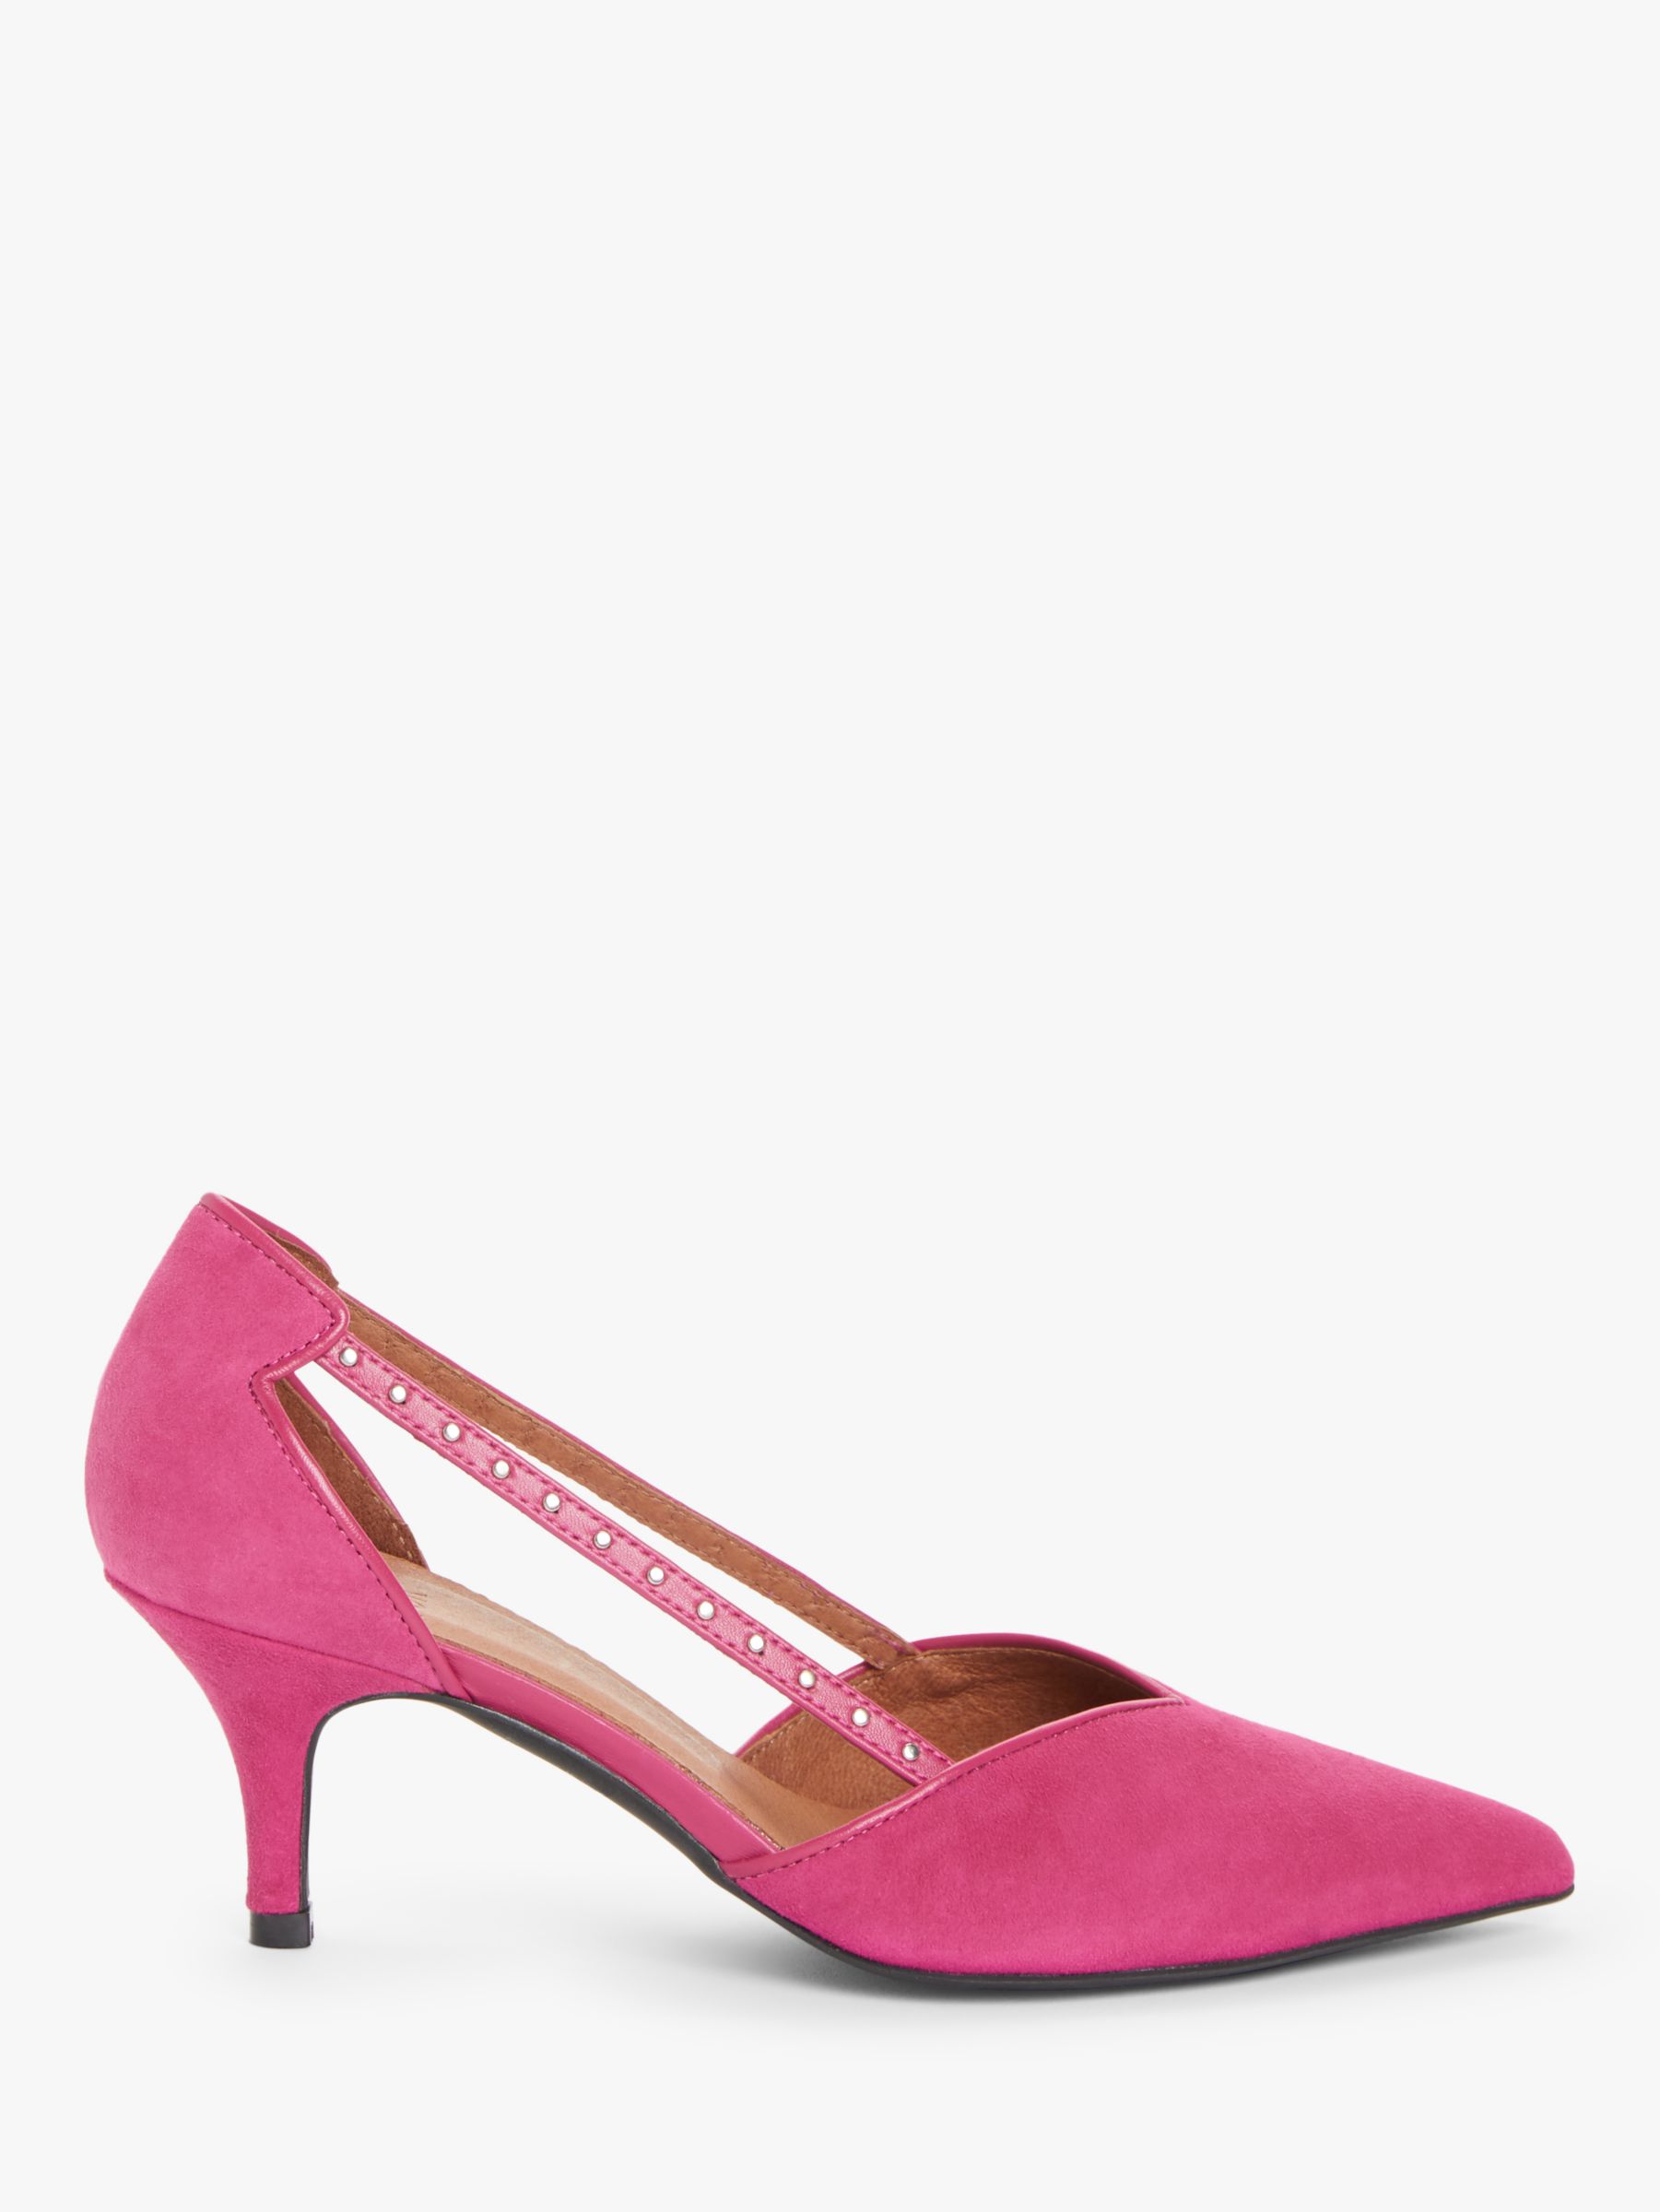 AND/OR Christia Suede Kitten Heel Court Shoes, Pink